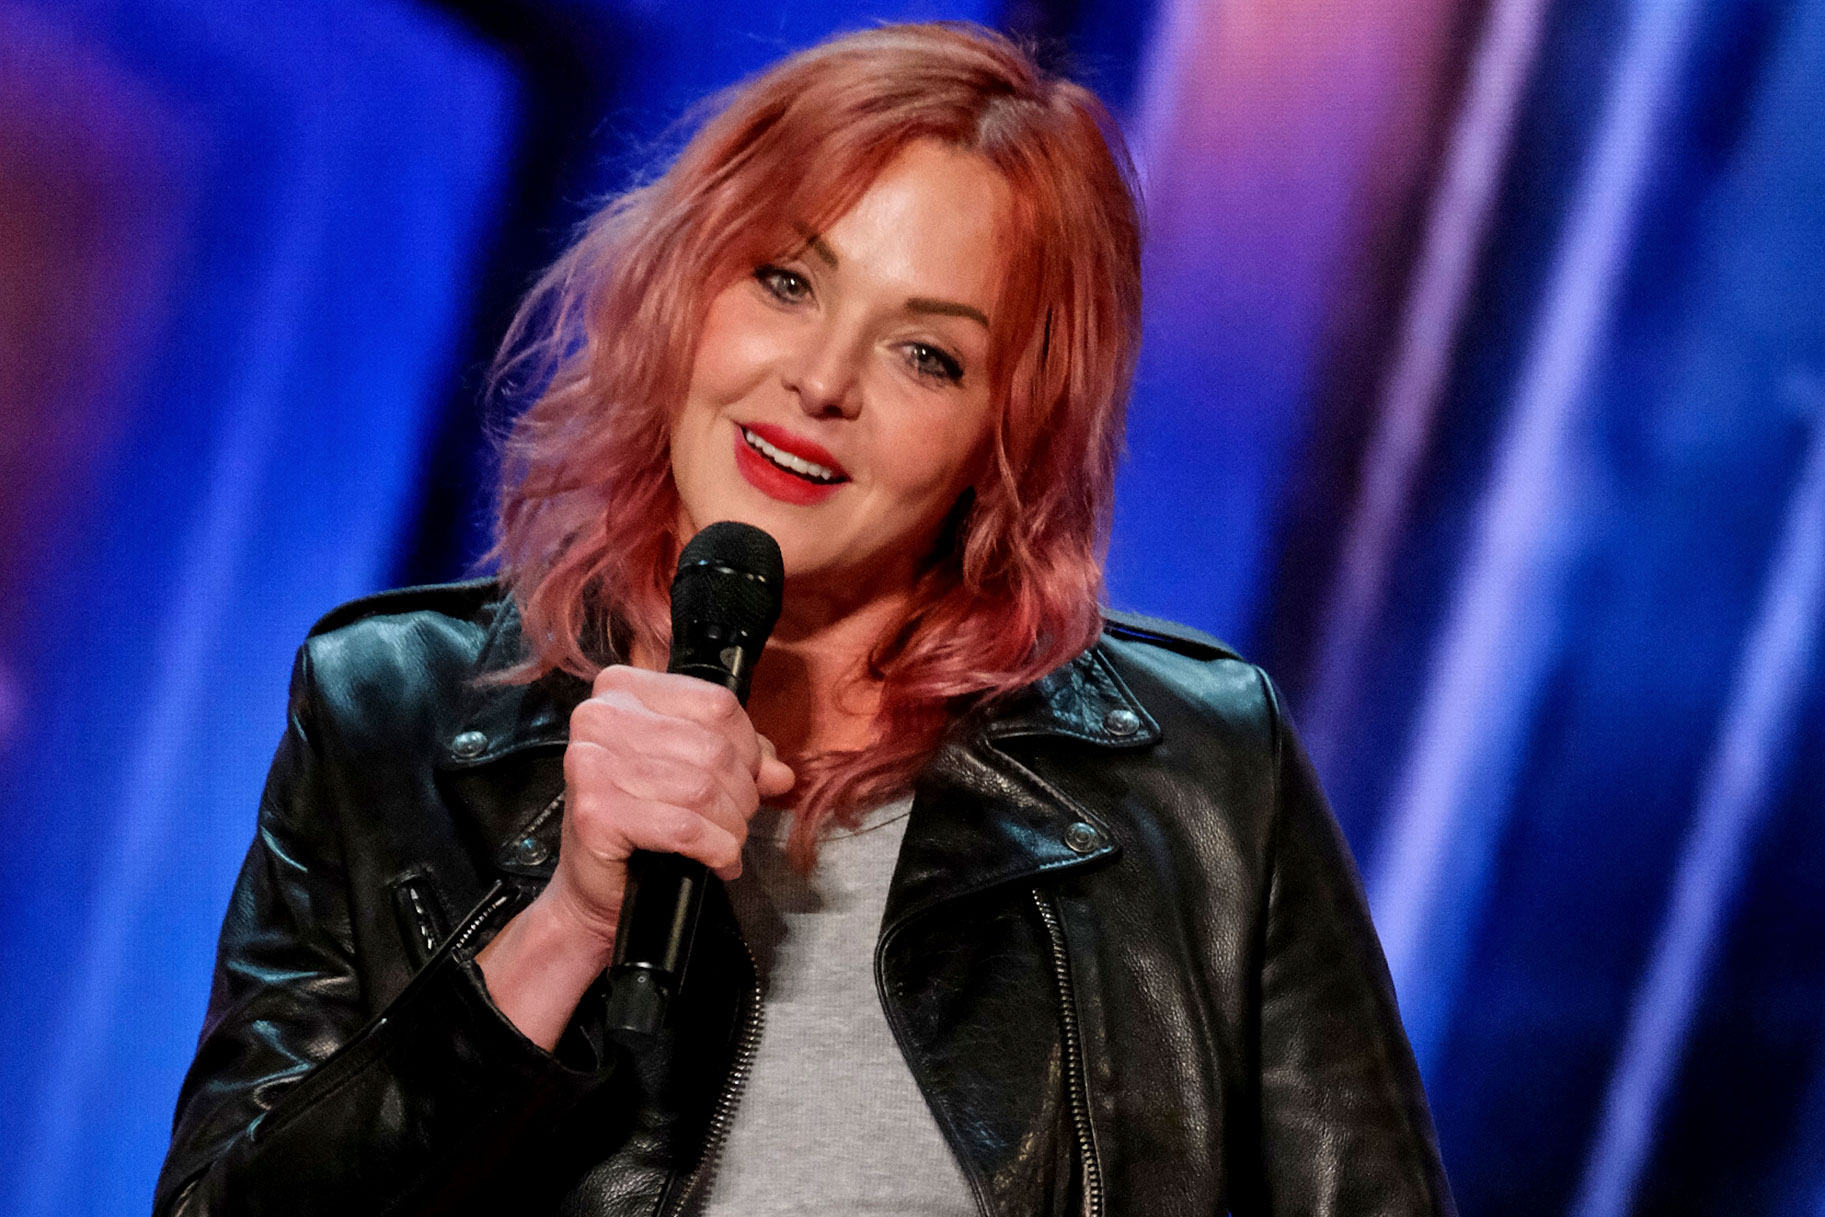 Storm Large Performs on AGT Season 16